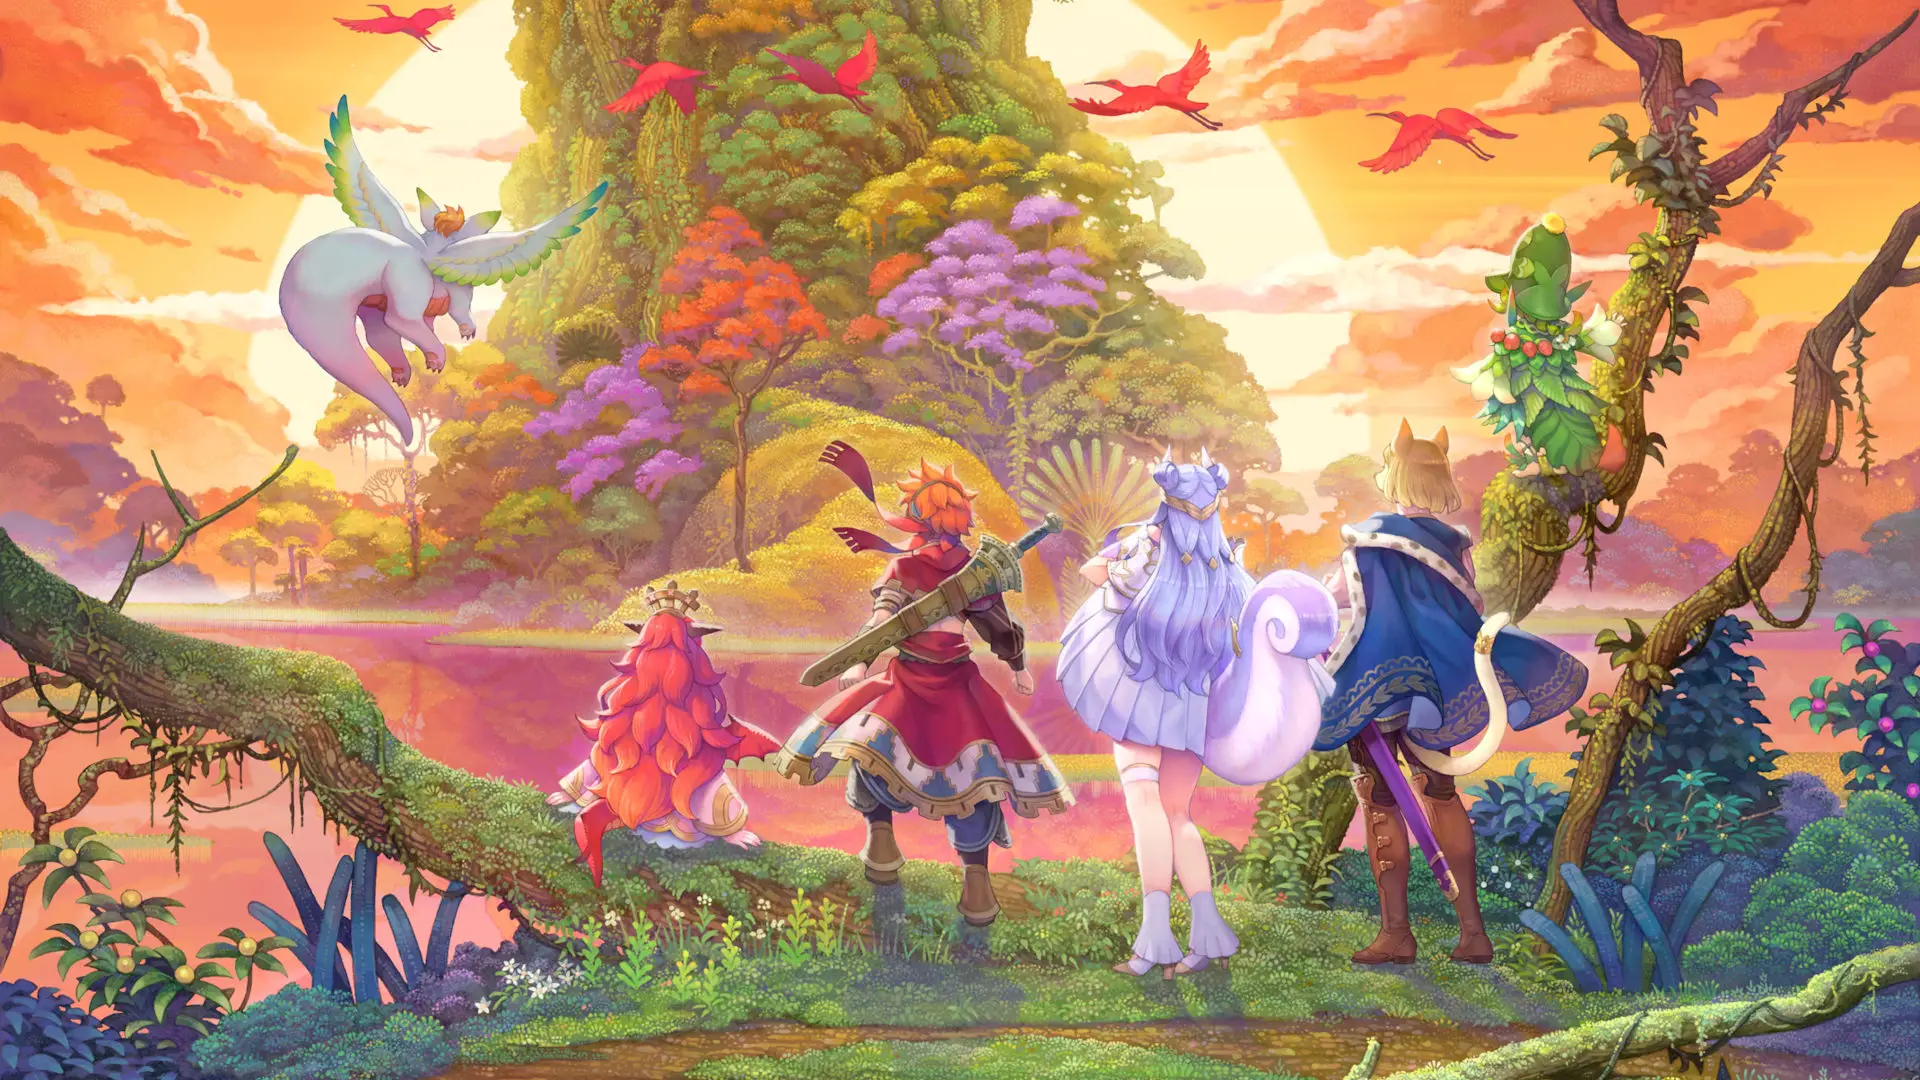 Visions of Mana Opens Wishlisting on PlayStation, Xbox, and PC